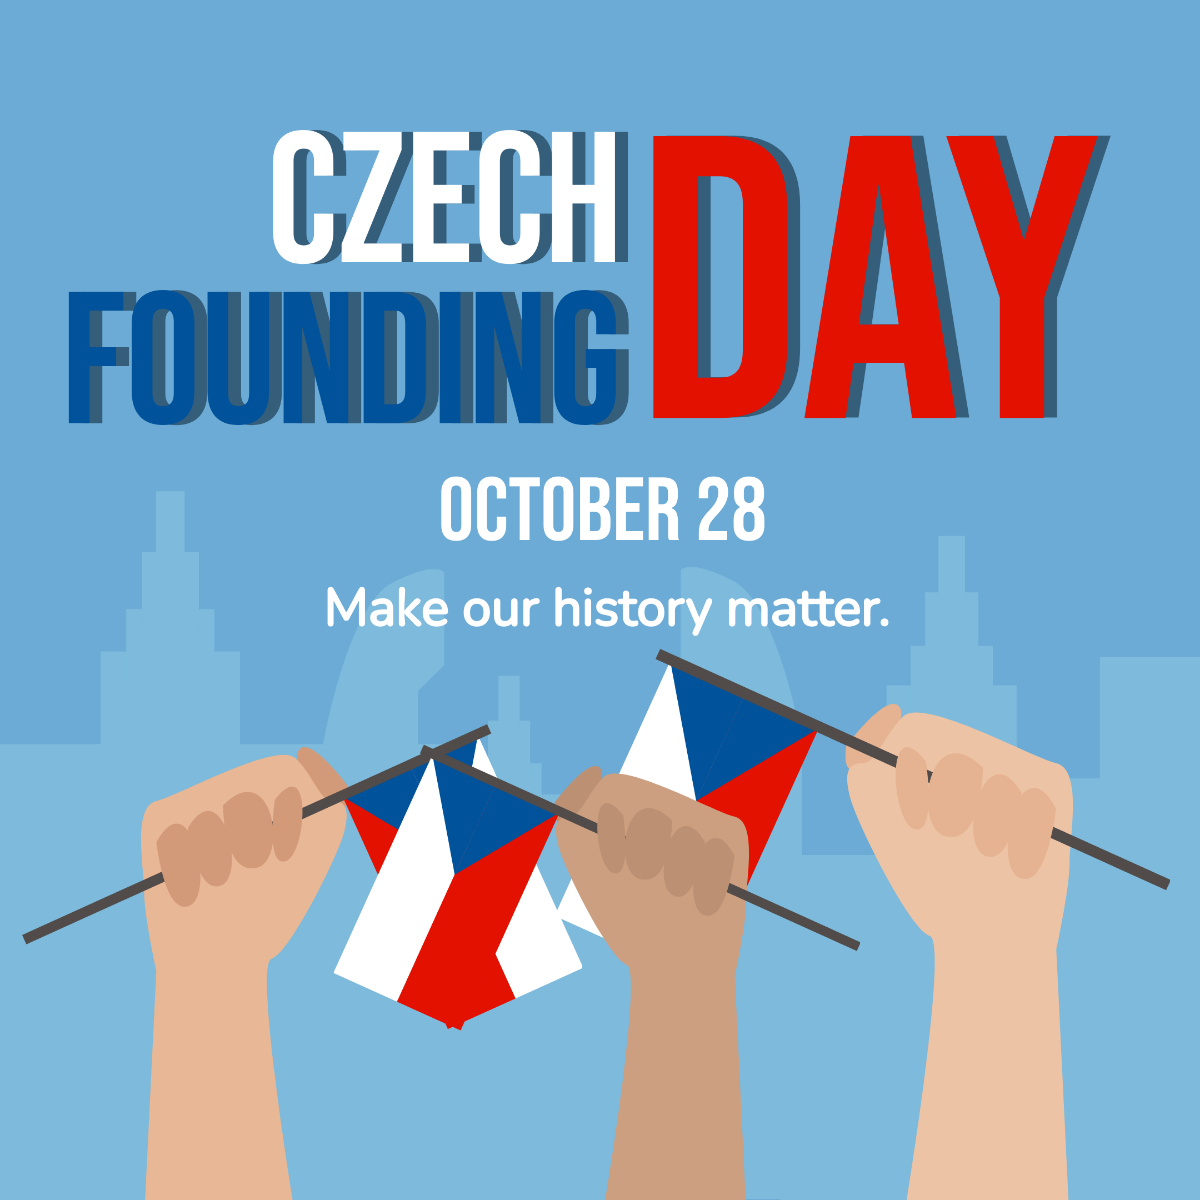 Free Czech Founding Day FB Post Template